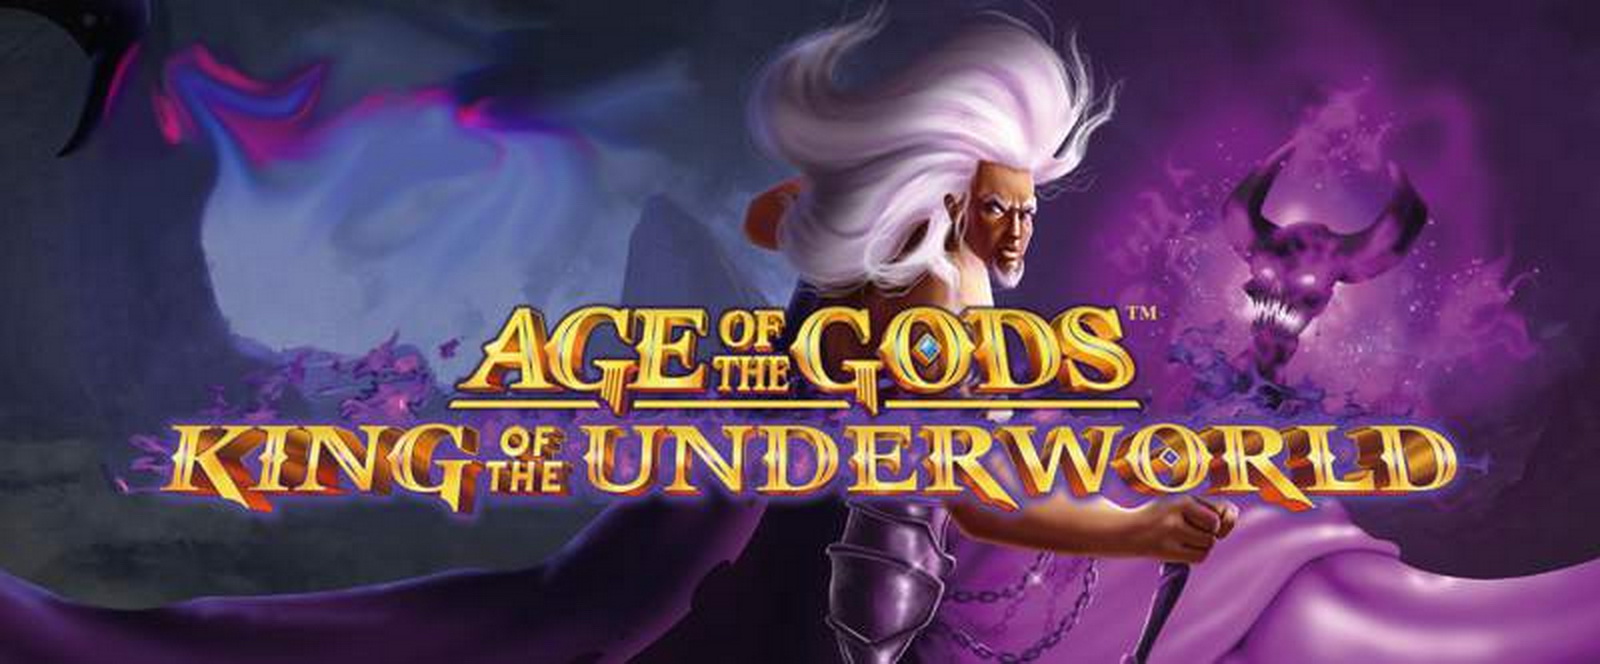 Age Of Gods King of the Underworld demo